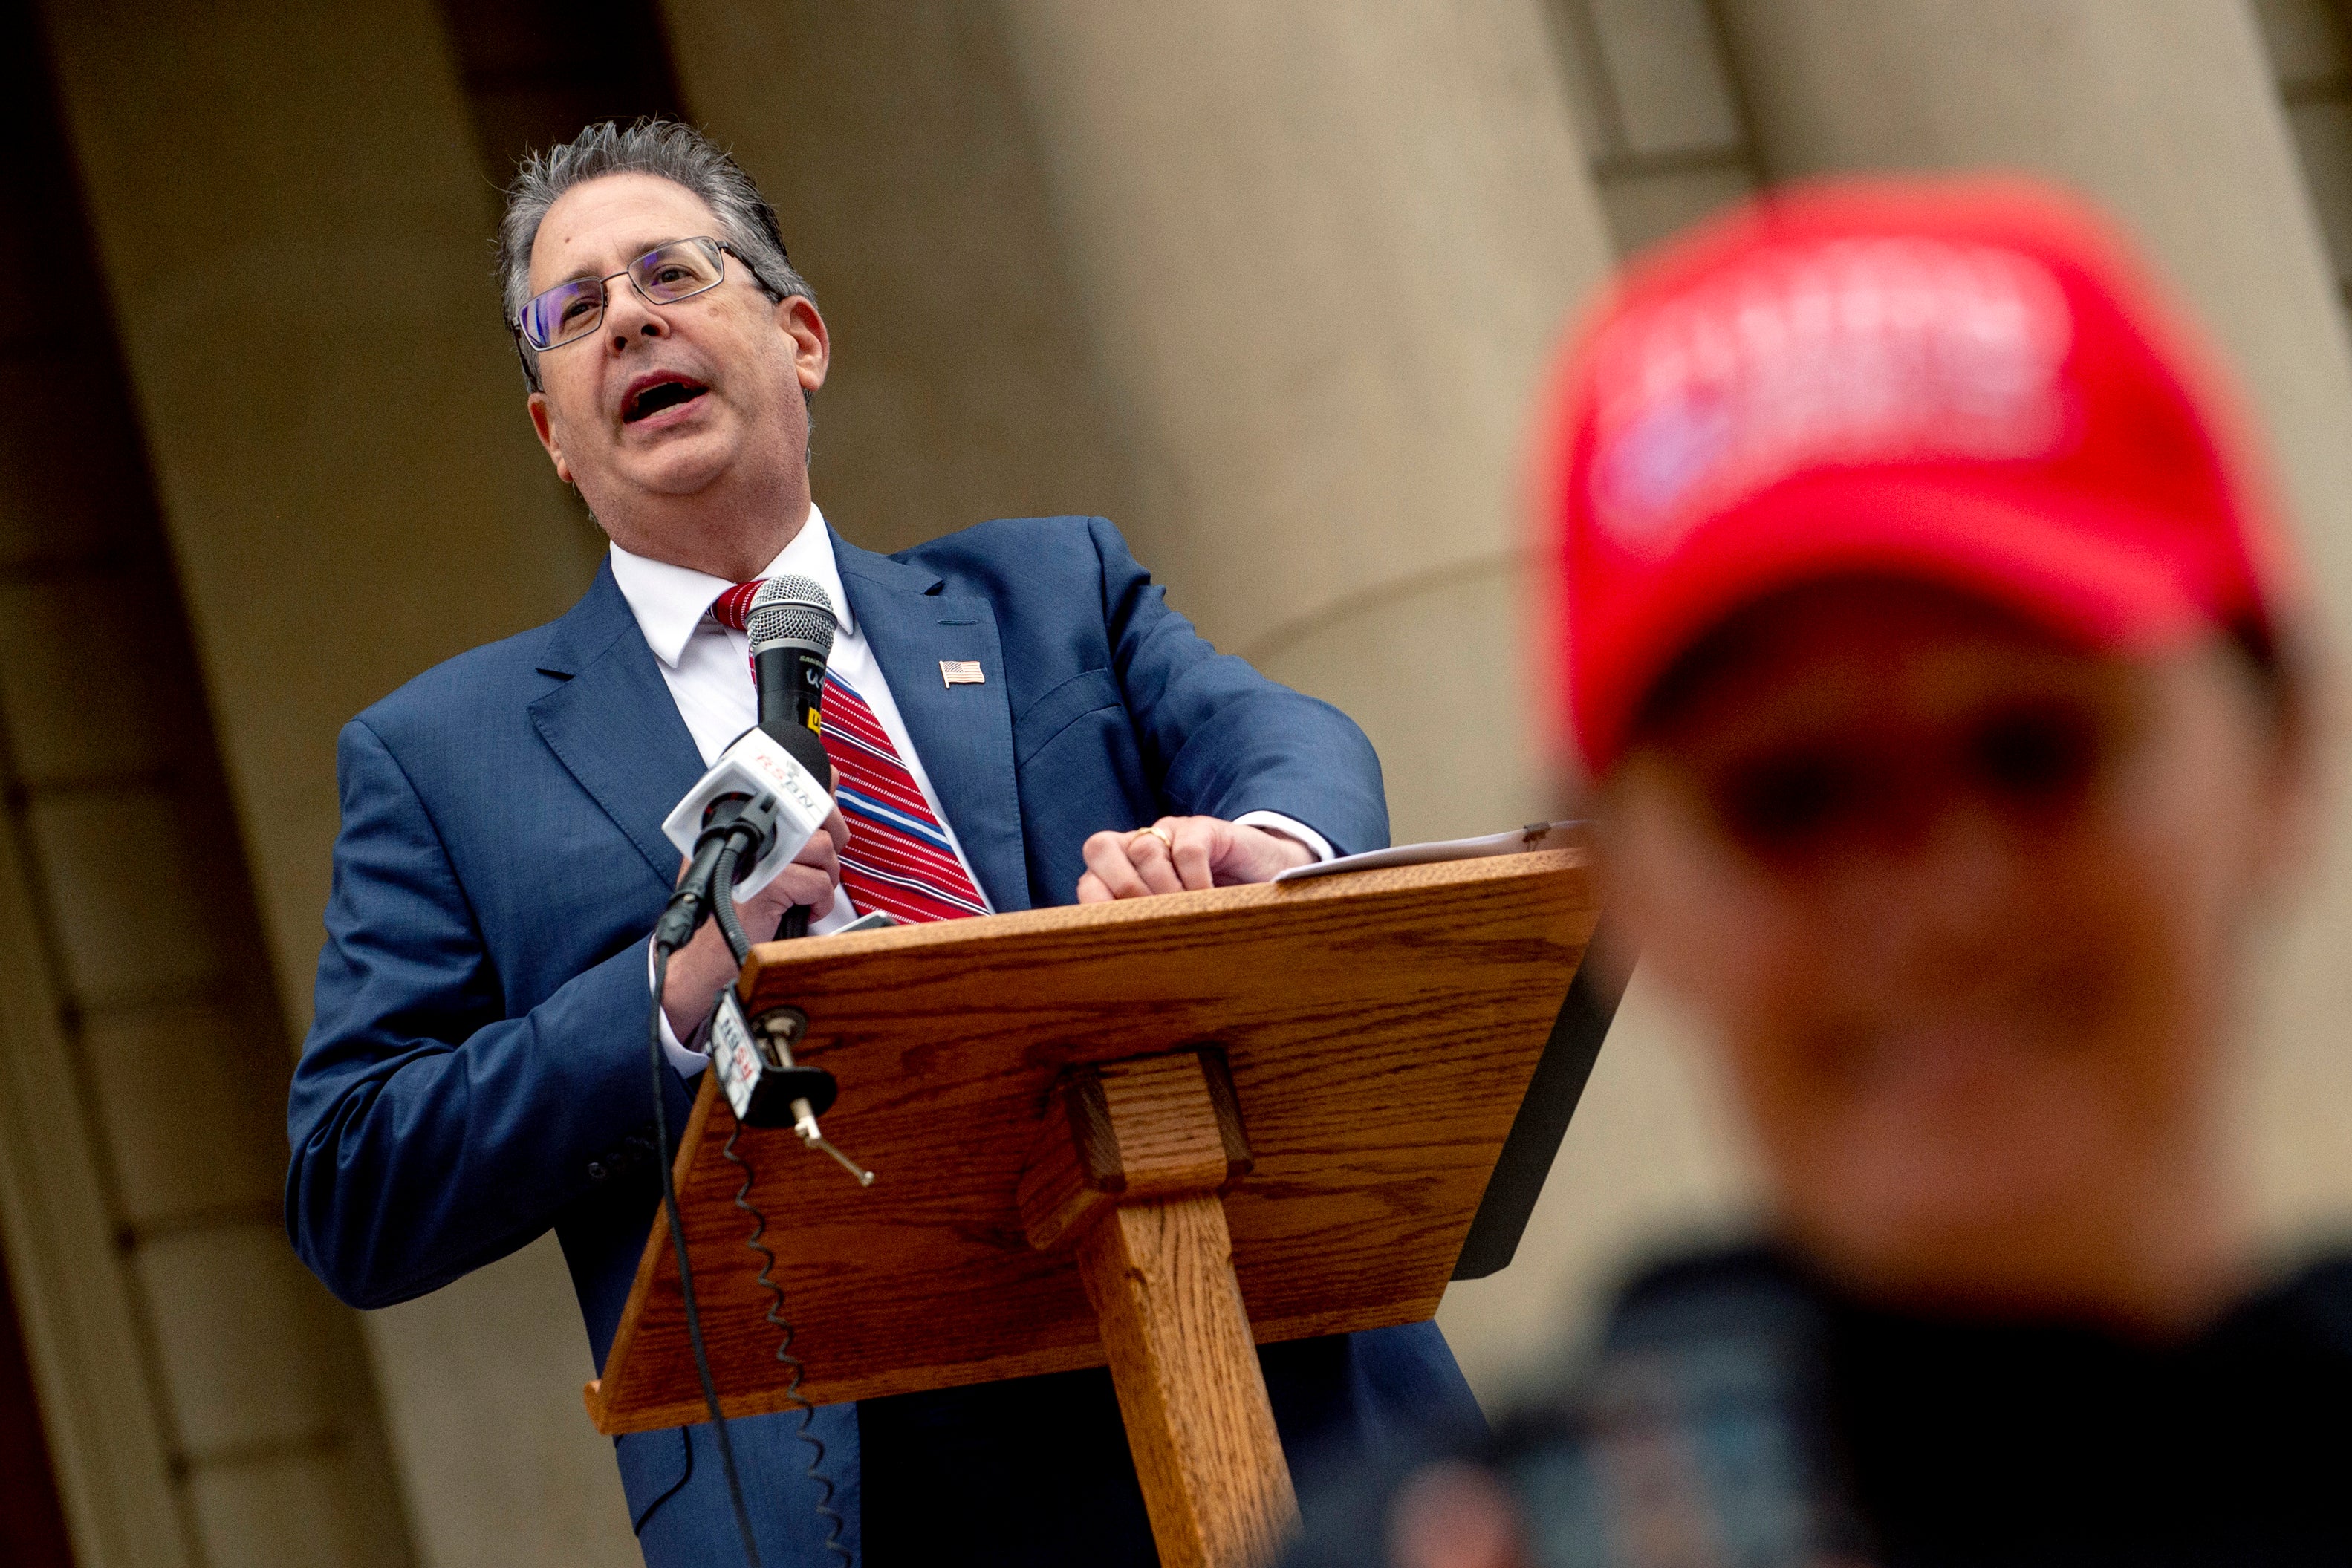 Matthew DePerno, Republican candidate for Michigan attorney general, speaks during a rally at the Michigan state Capitol, Oct. 12, 2021